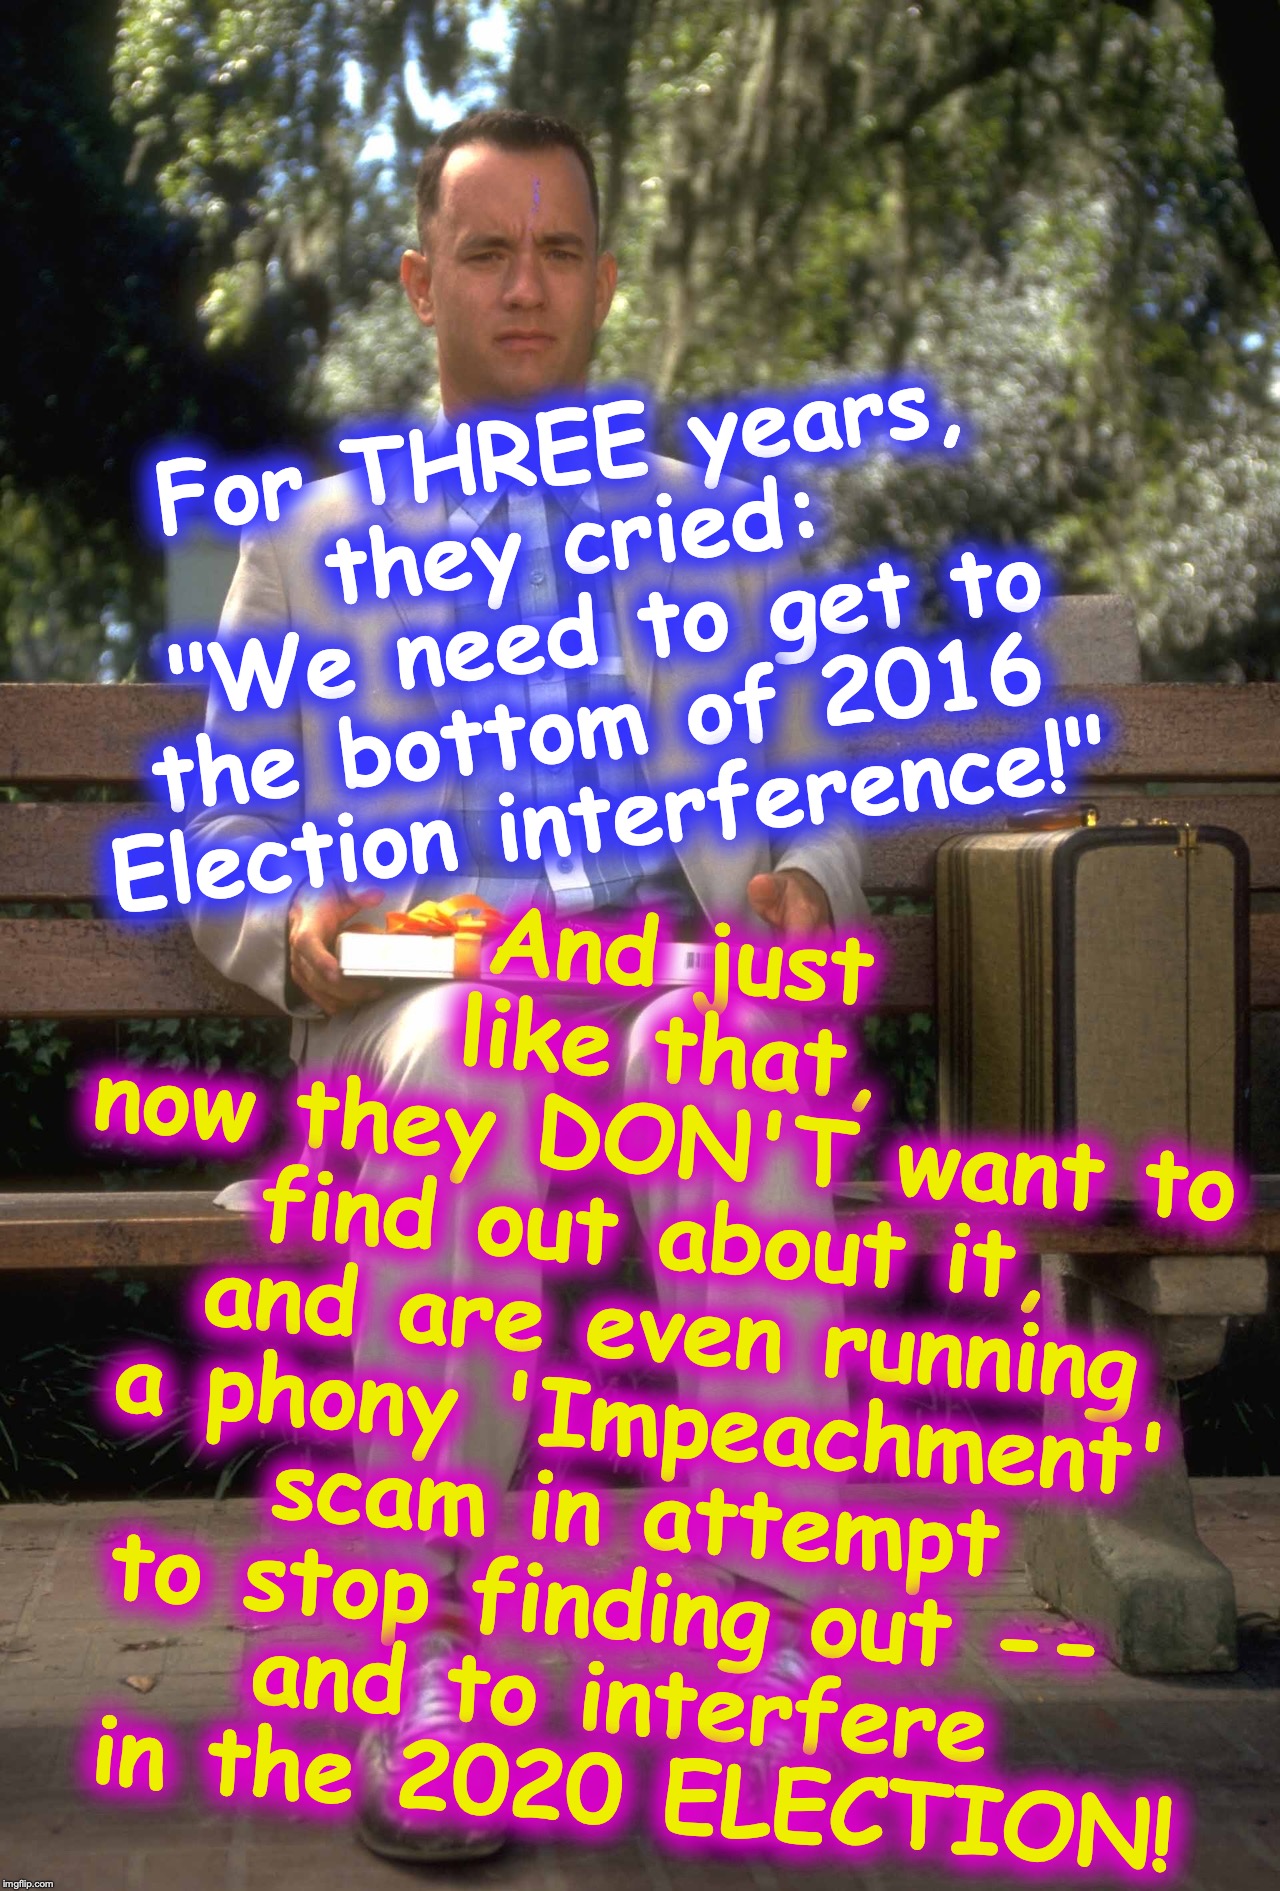 endless entertaining hypocrisy | And just like that,
 now they DON'T want to 
find out about it,
 and are even running a phony 'Impeachment' scam in attempt to stop finding out -- 
and to interfere
 in the 2020 ELECTION! For THREE years, they cried:
 "We need to get to the bottom of 2016 Election interference!" | image tagged in twist | made w/ Imgflip meme maker